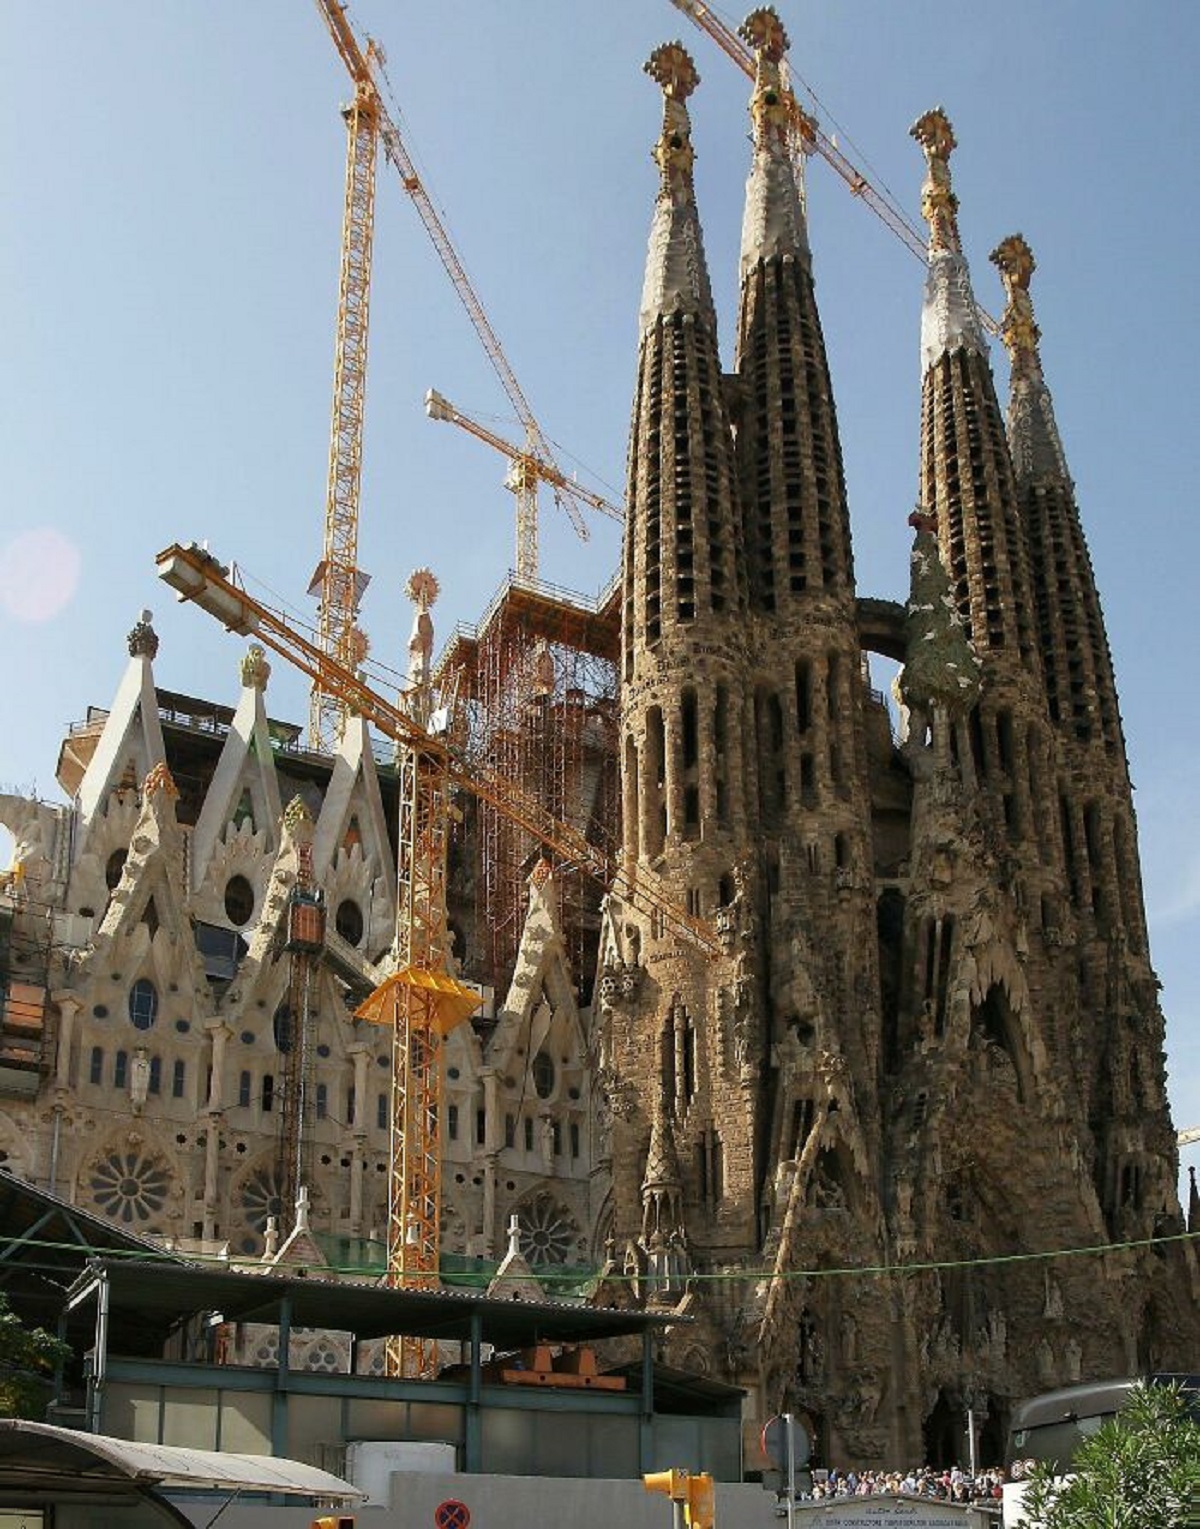 The largest unfinished church in the world, the Sagrada Família, began construction in 1886. It is expected to be completed in 2026, nearly 150 years after it began construction.